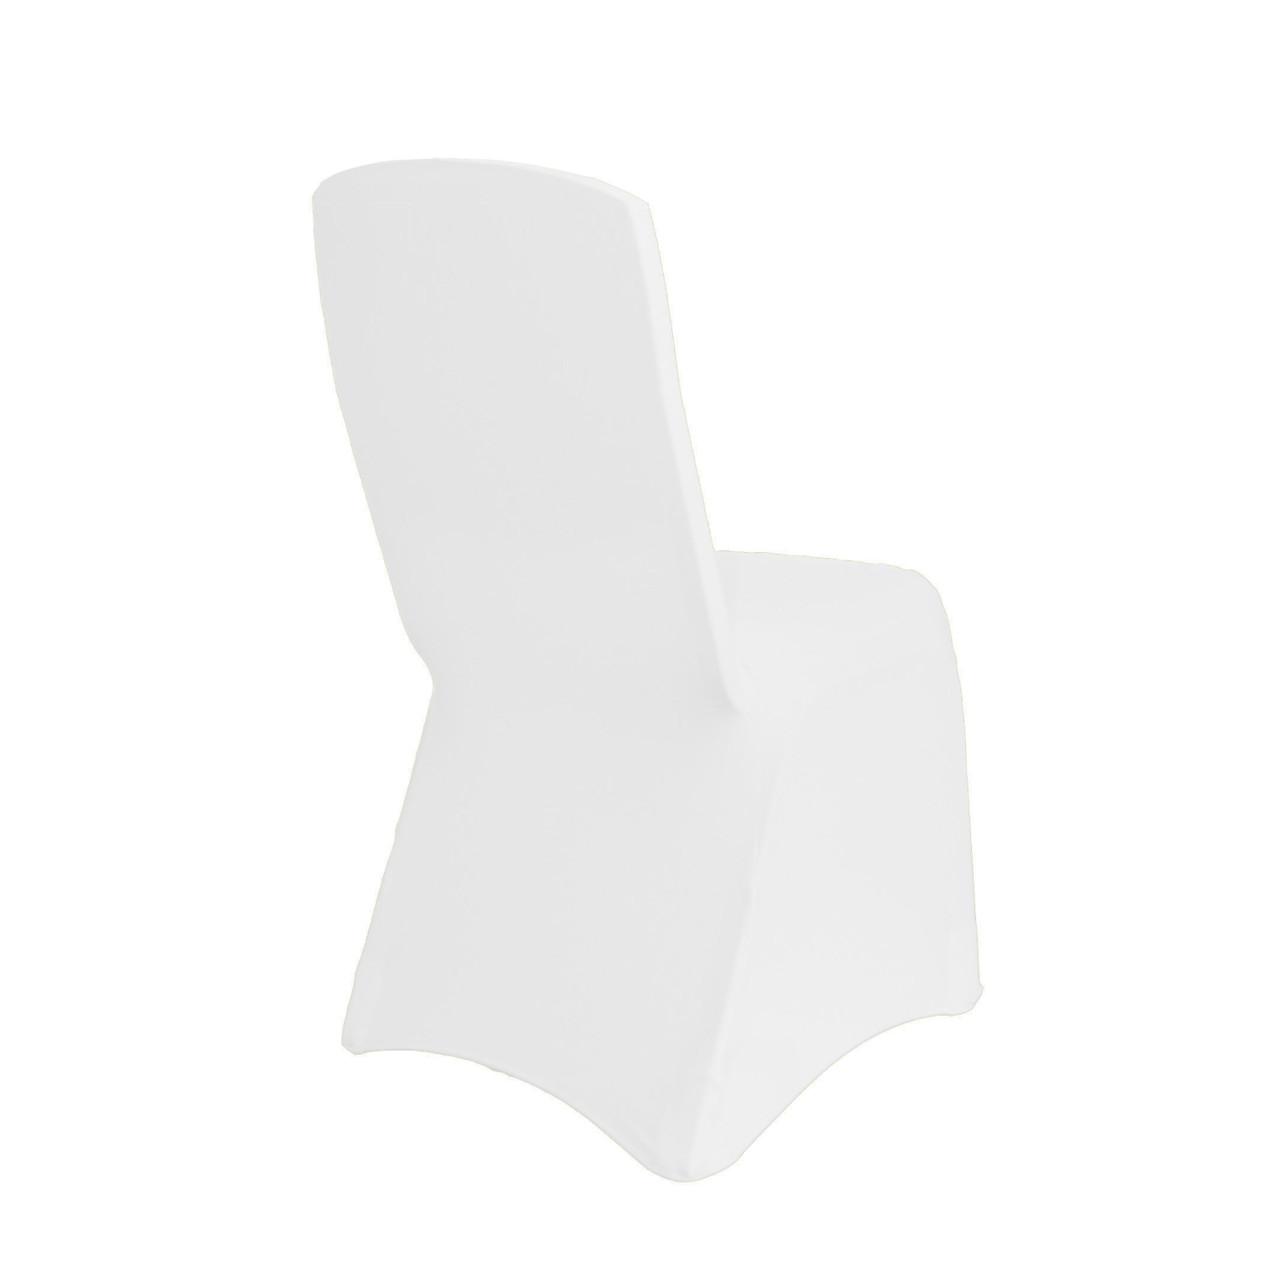 Square Top Stretch Spandex Banquet Chair Cover White - Your